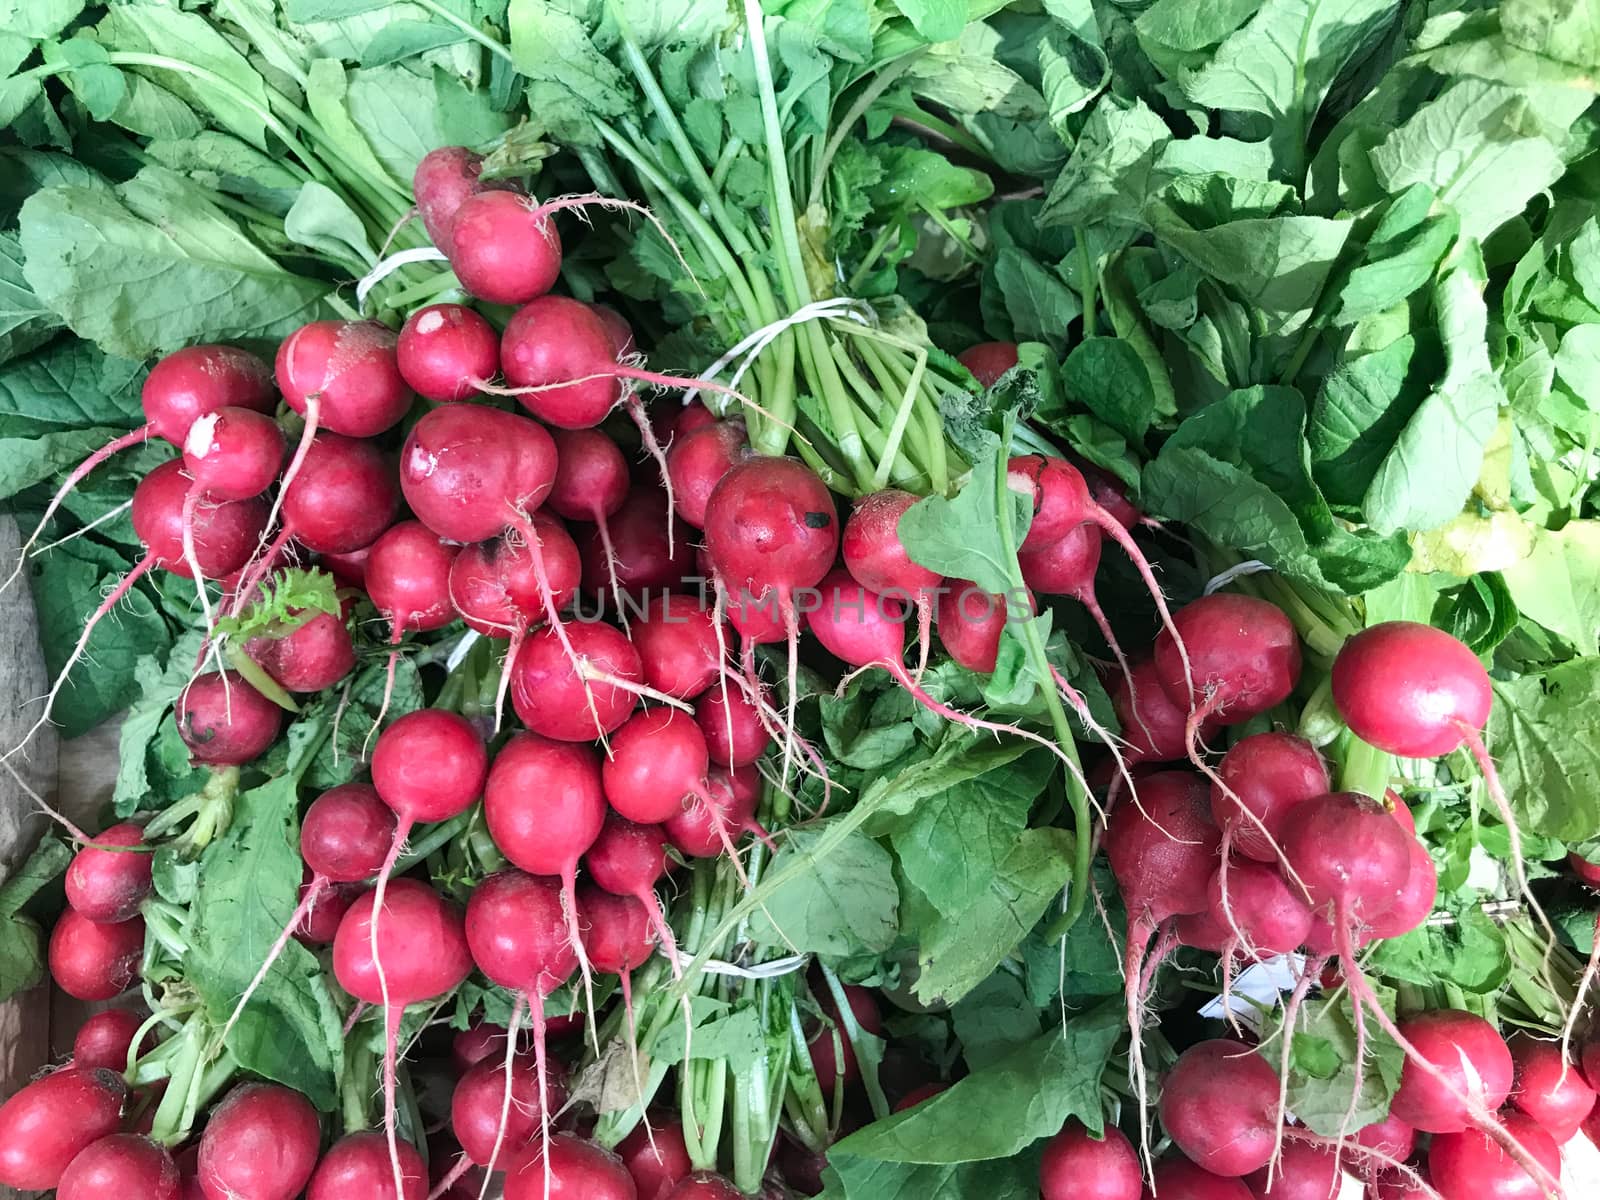 Fresh Red Radishes Exposed For Sale In Supermarket by nenovbrothers